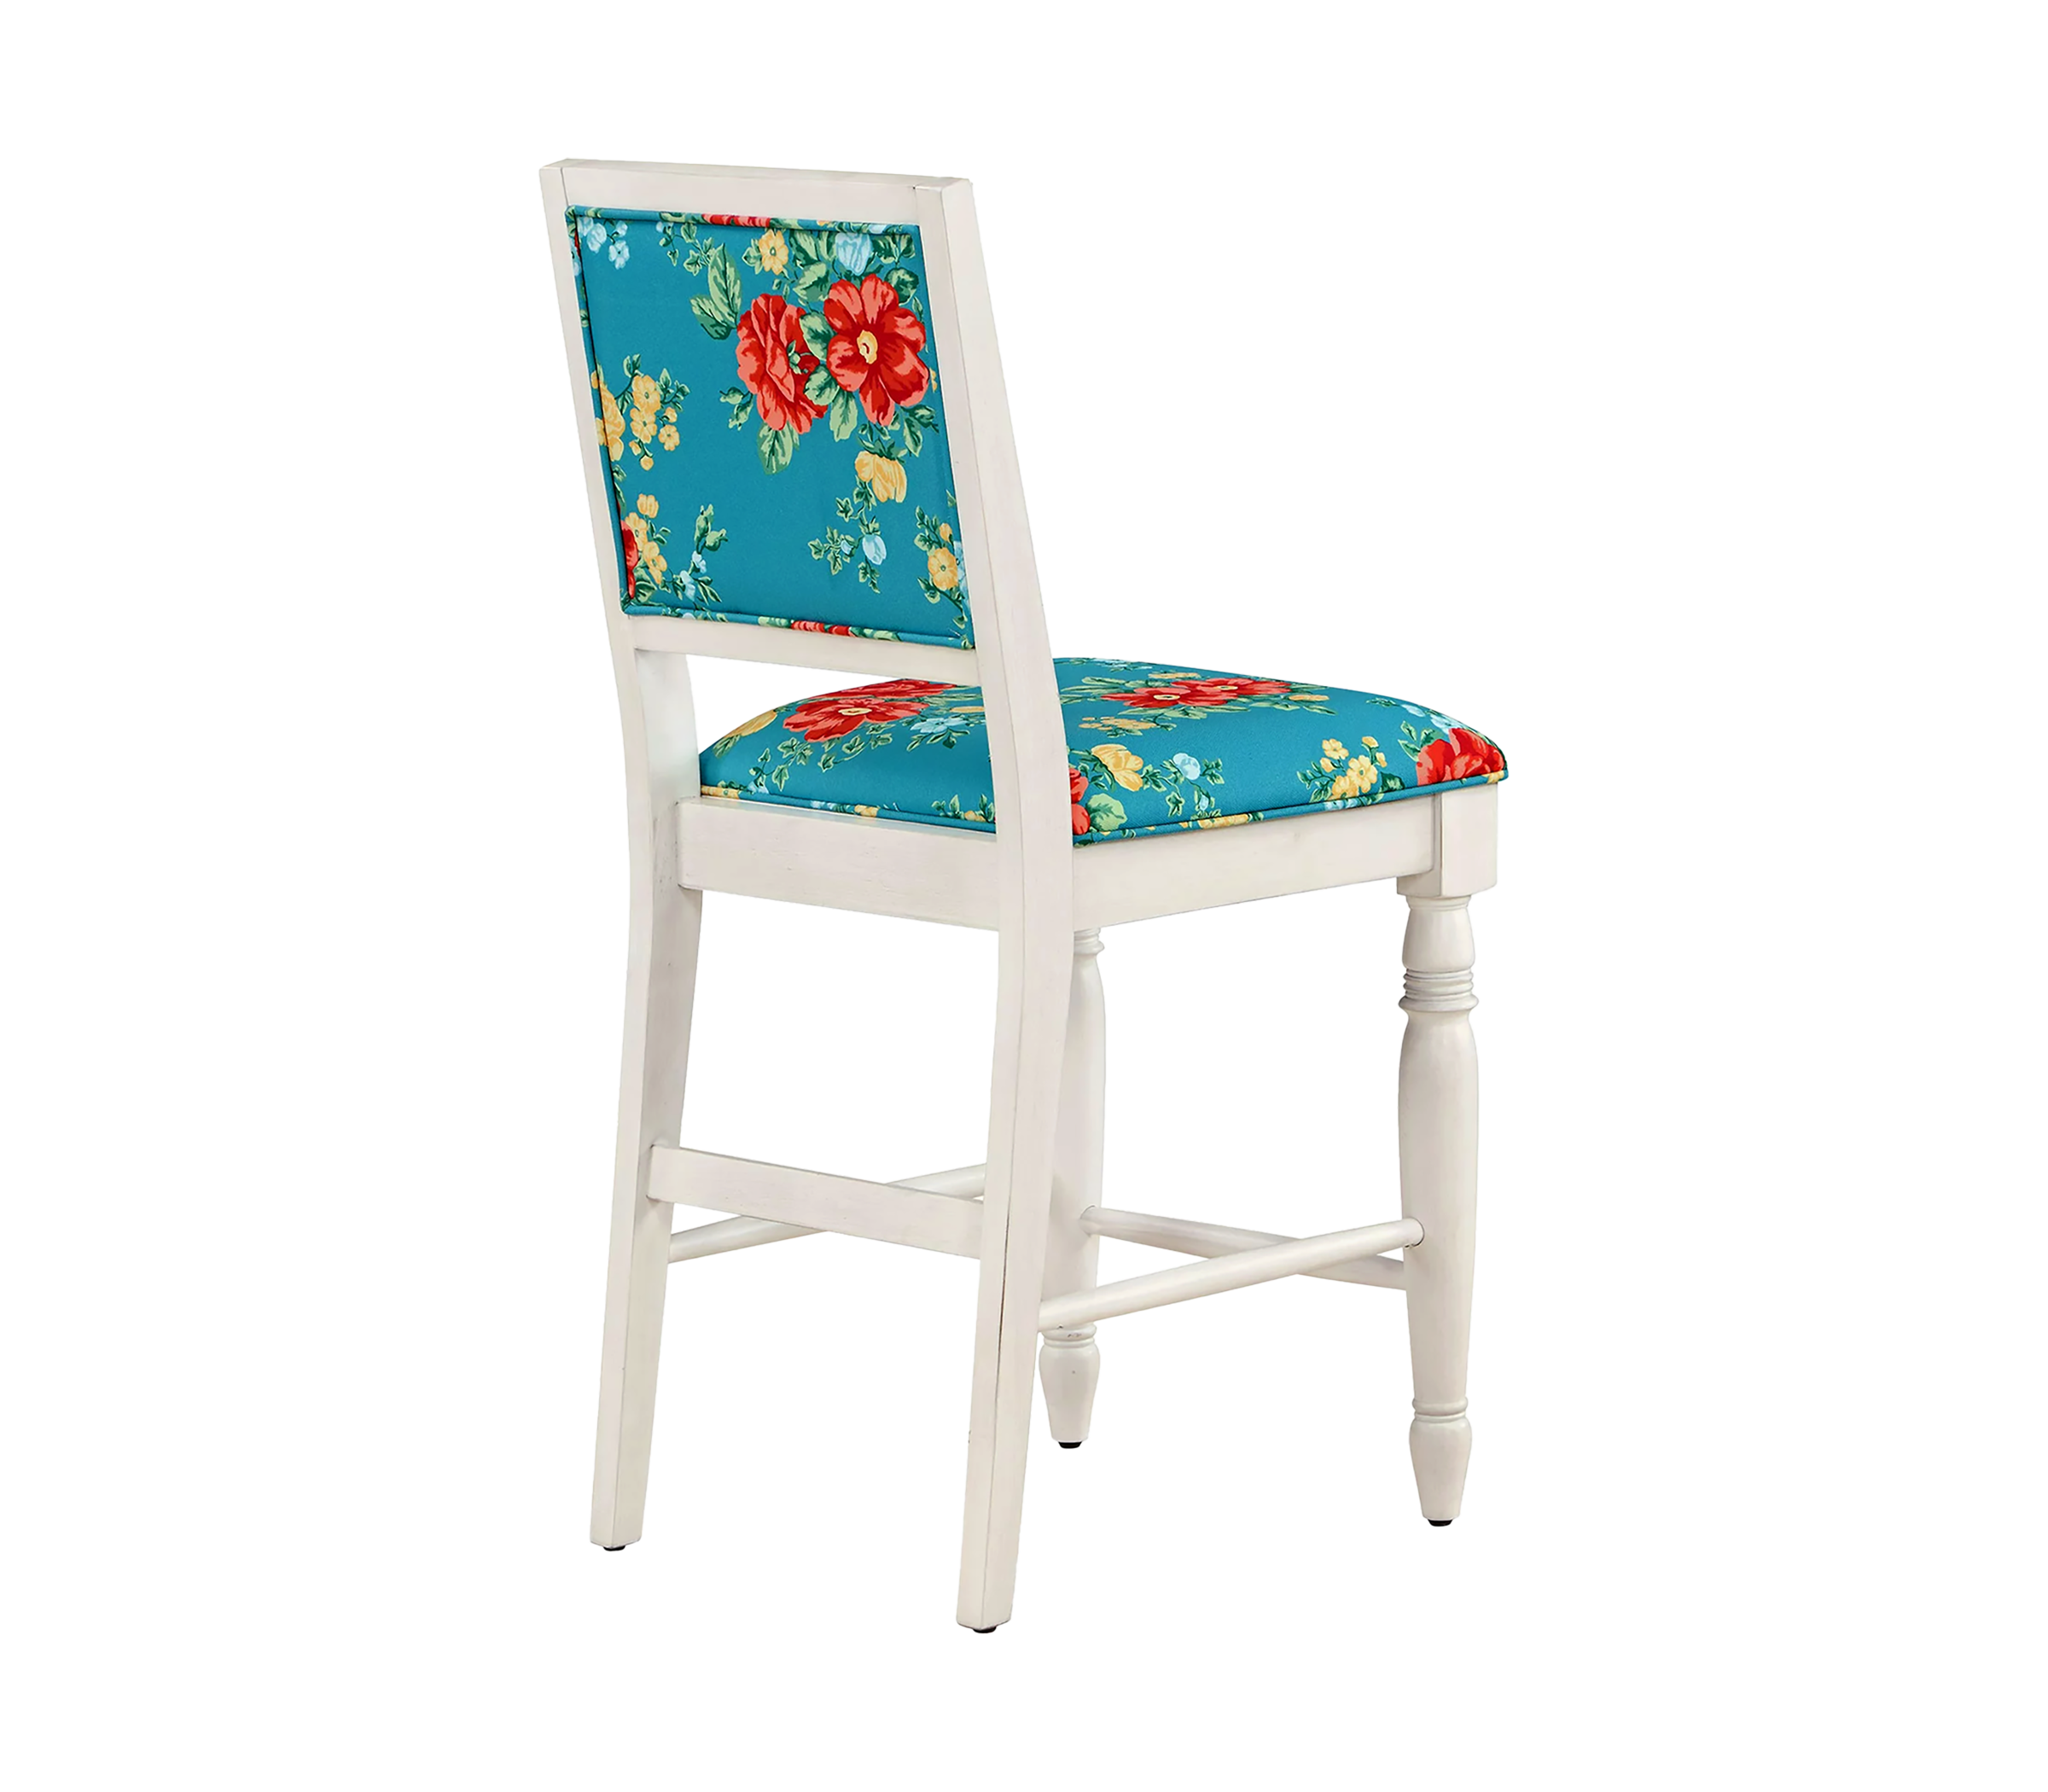  Counter Height Stools - Vintage Floral in Teal  [Walmart]  